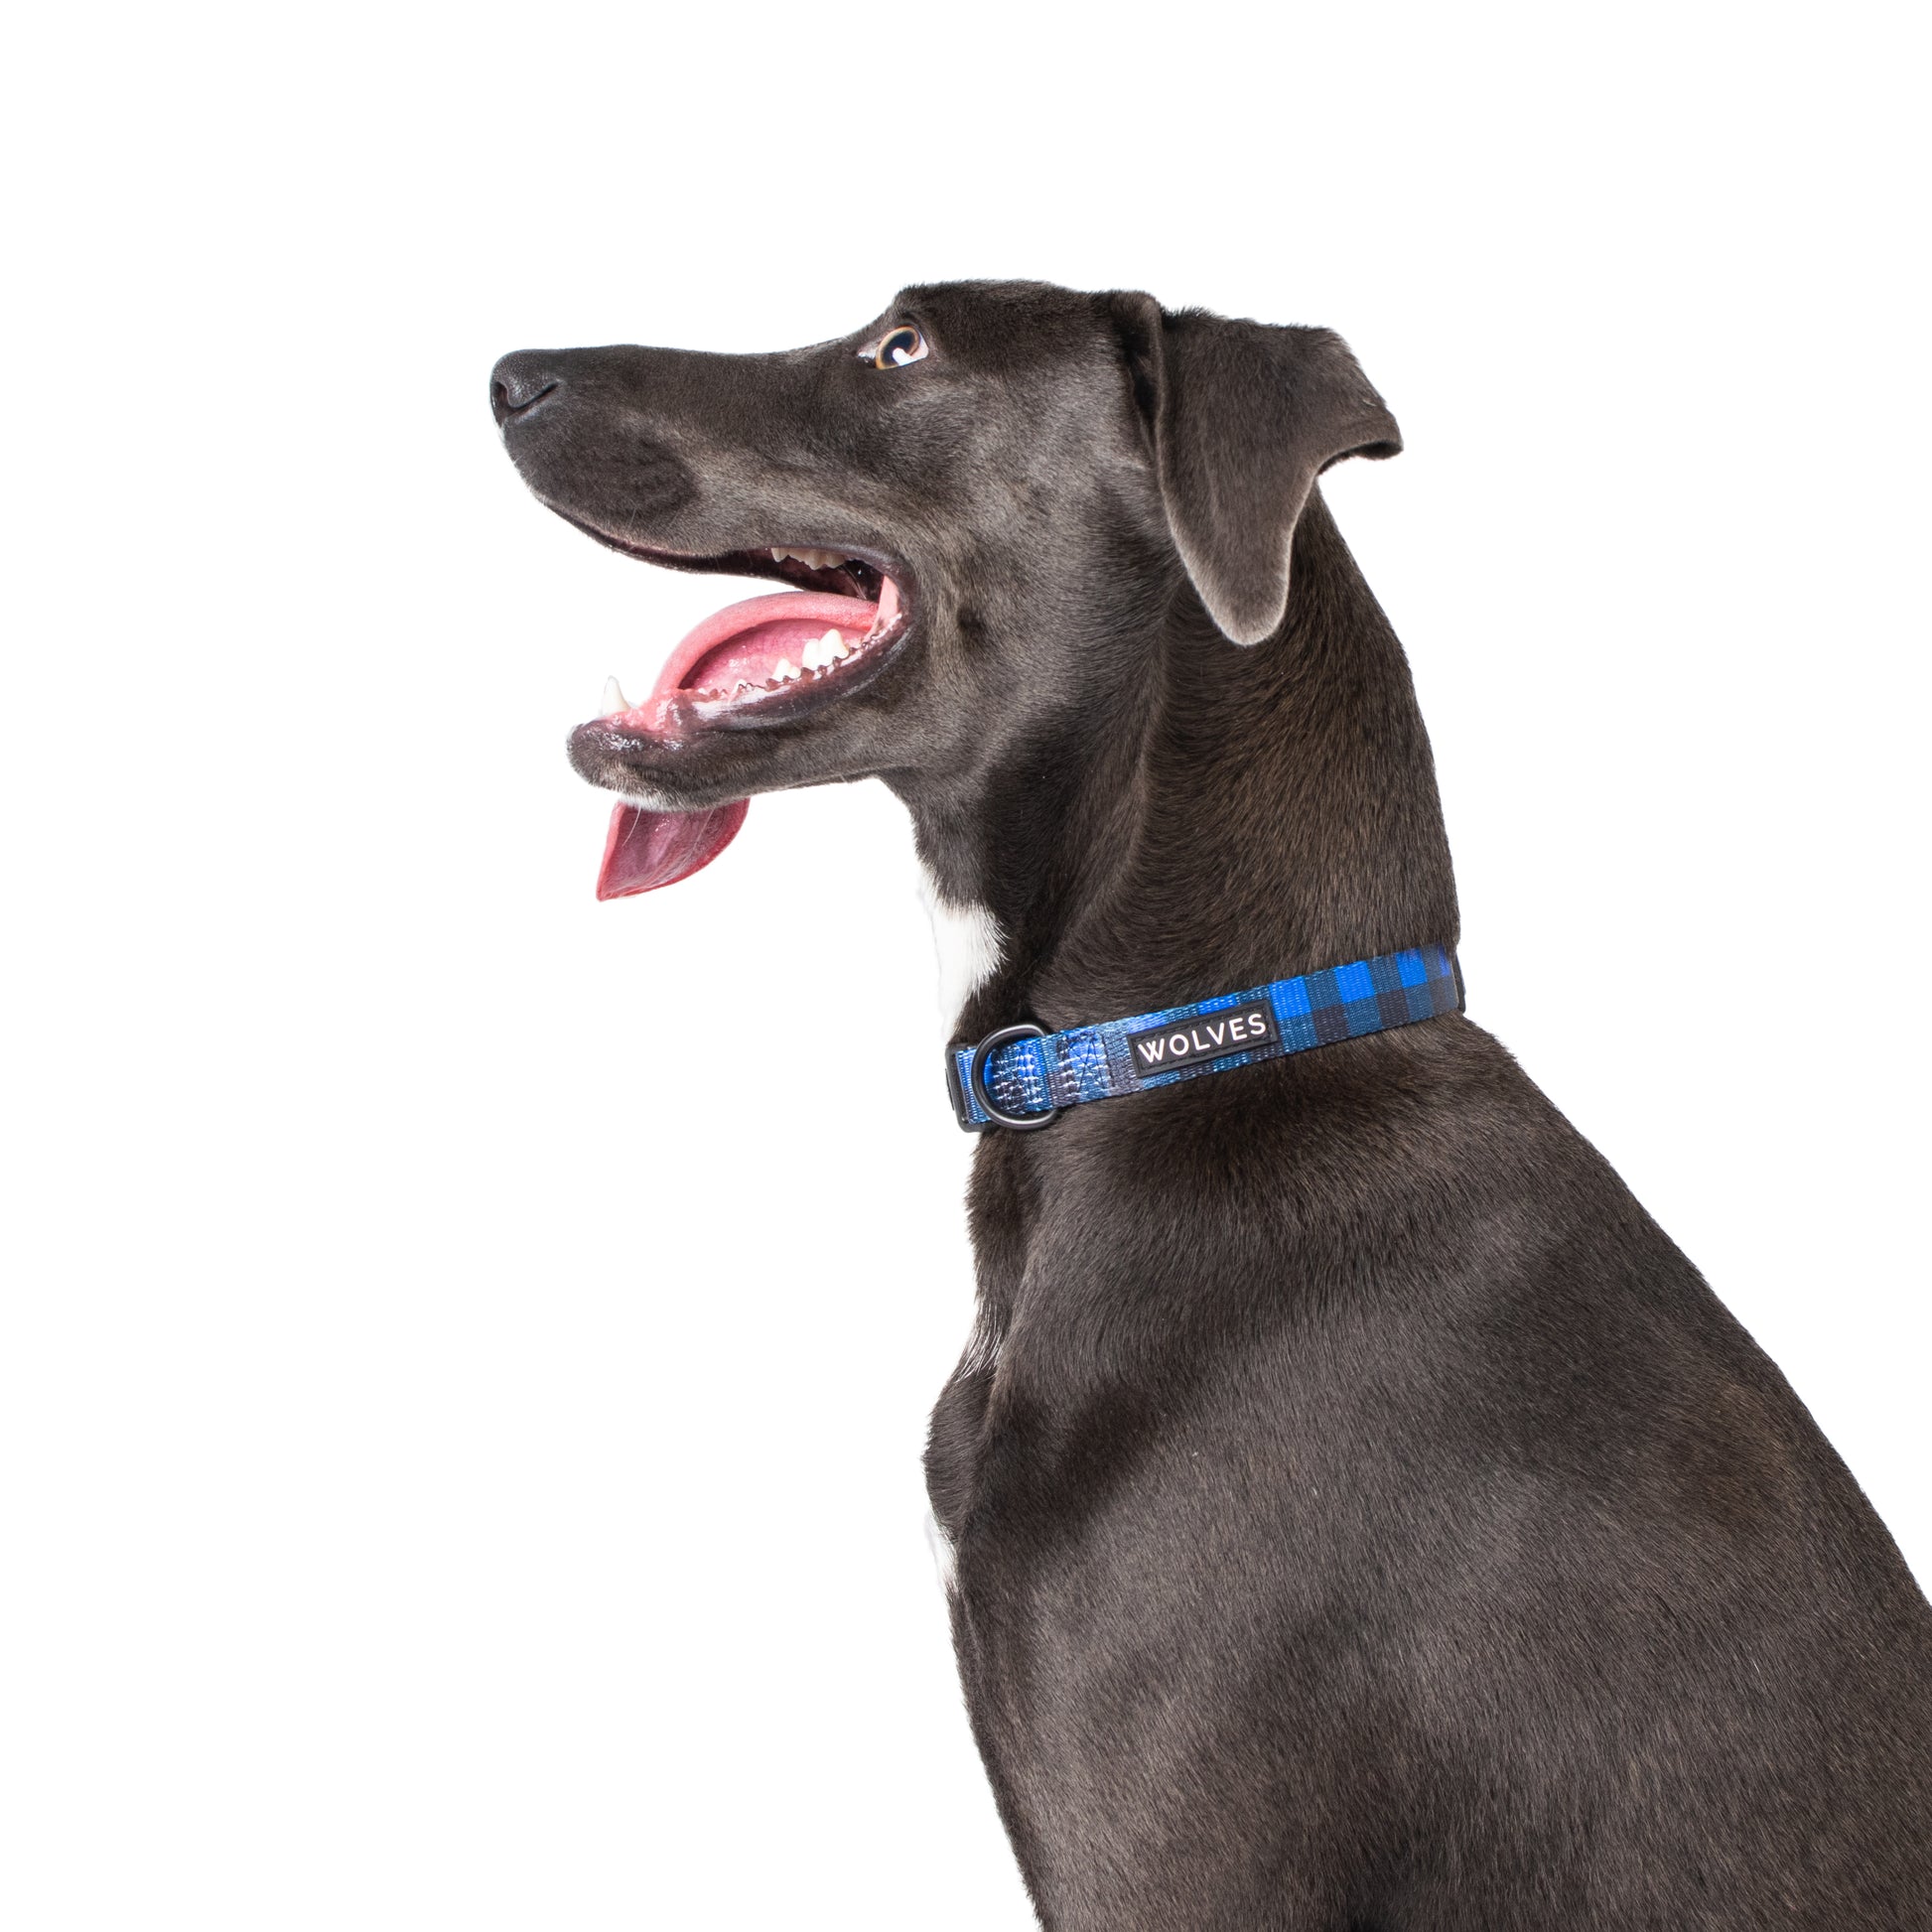 Black dog wearing a Blue & black checked dog collar with "Wolves" logo.